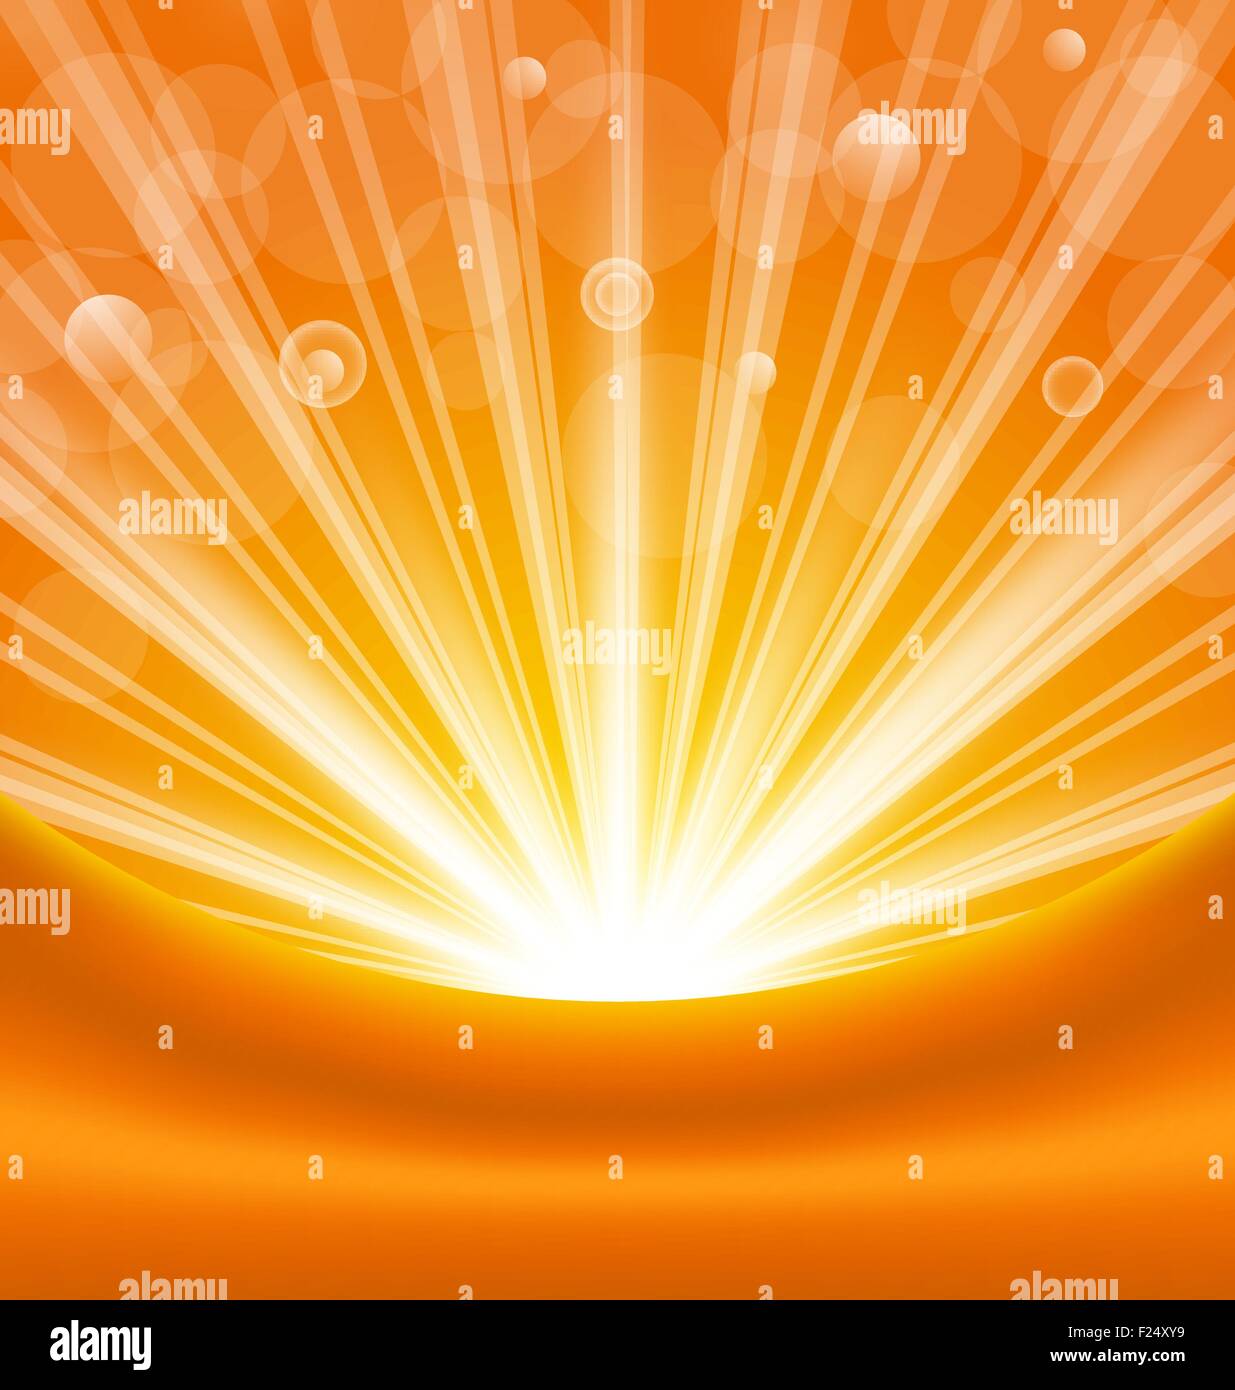 Abstract orange background with sun light rays stock vector image art